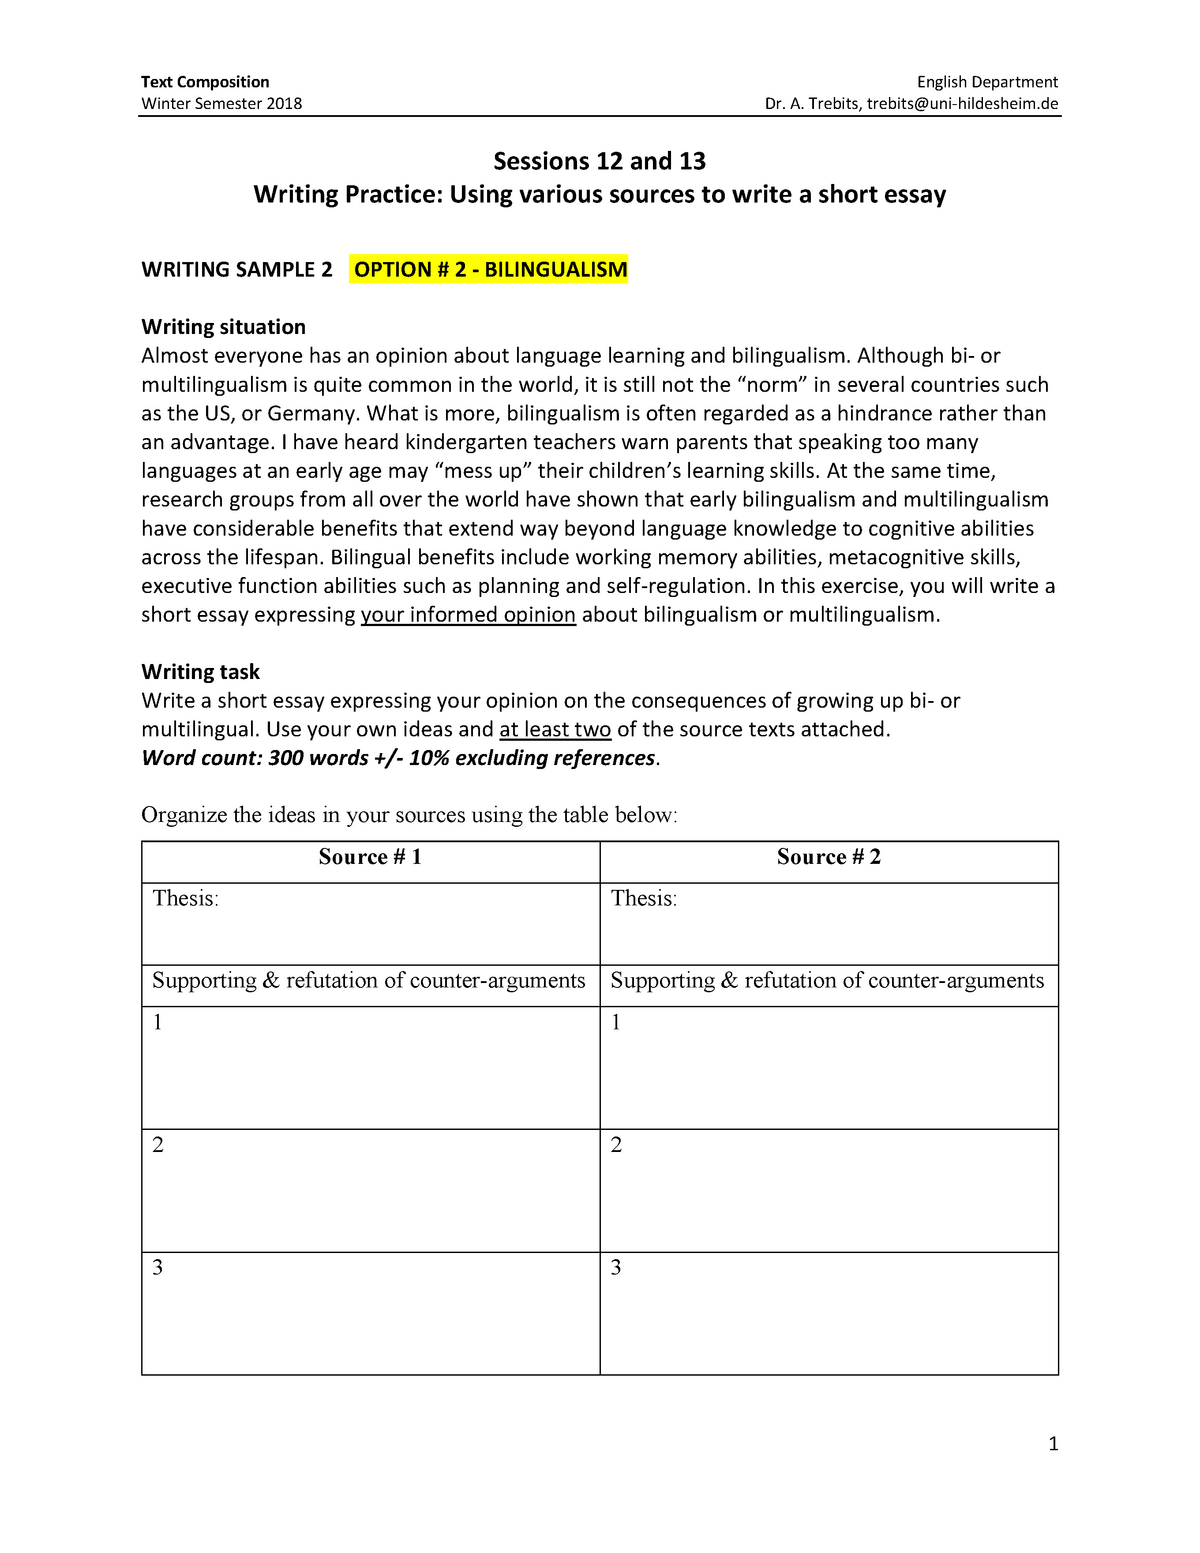 session-12-13-using-various-sources-to-write-a-short-essay-option-2